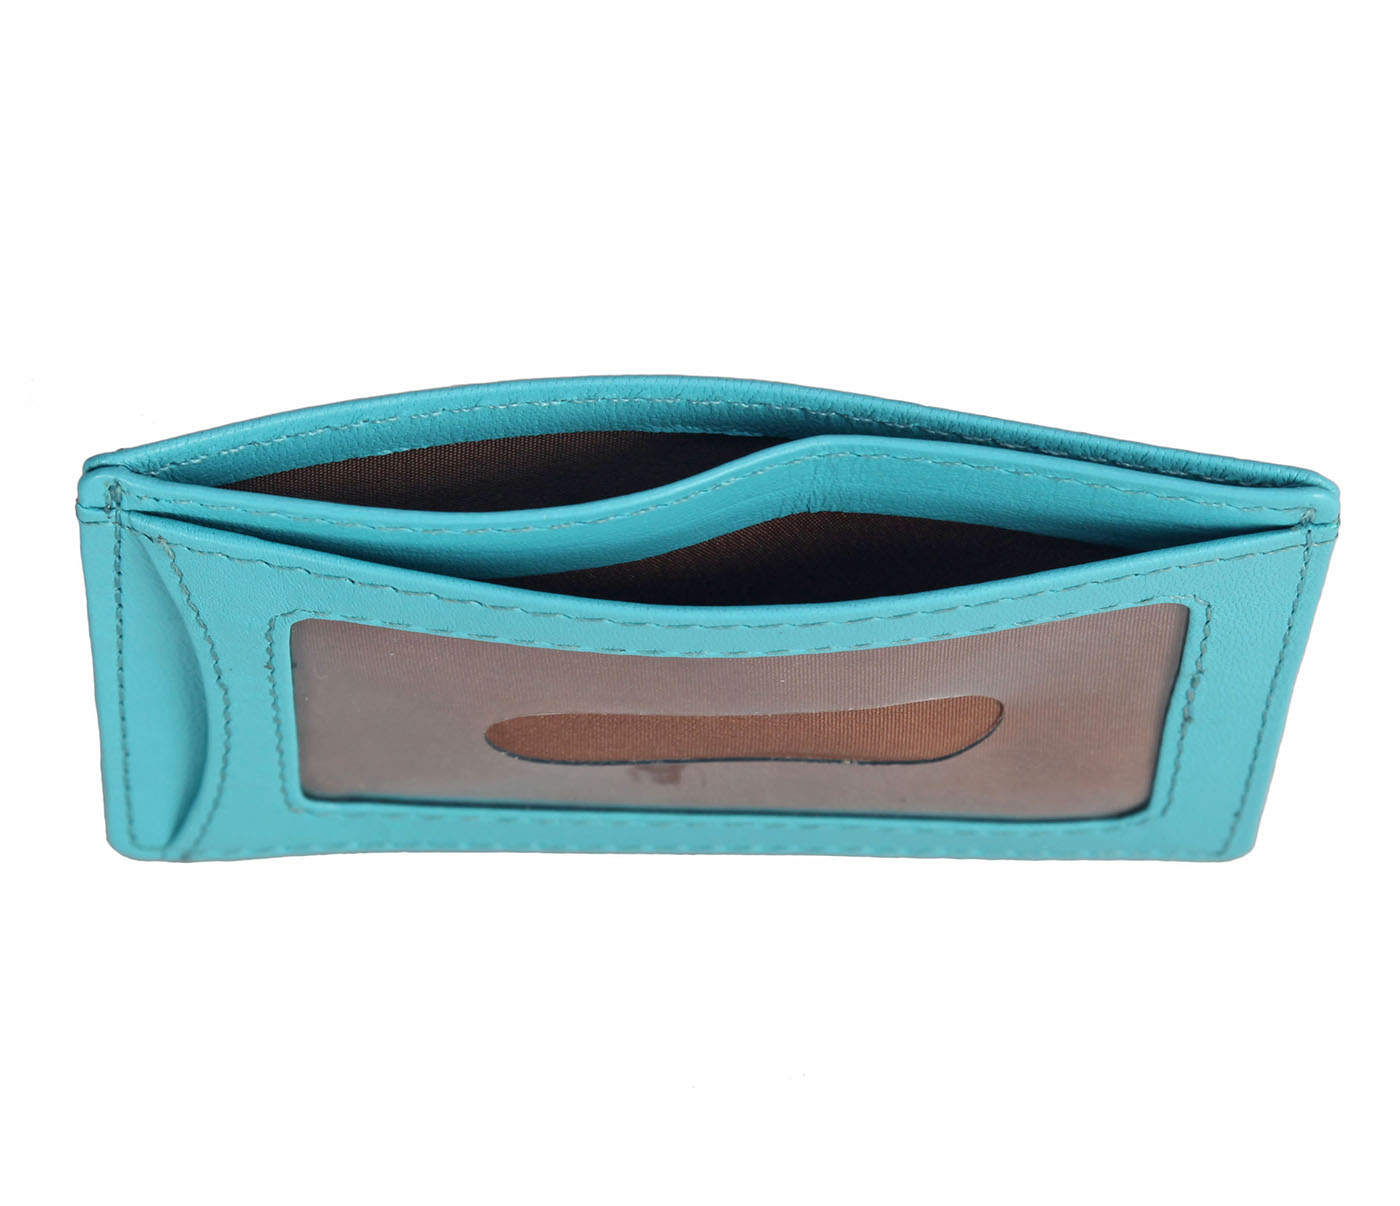 W271--Credit card holder with transparent slot in Genuine leather - Turquoise